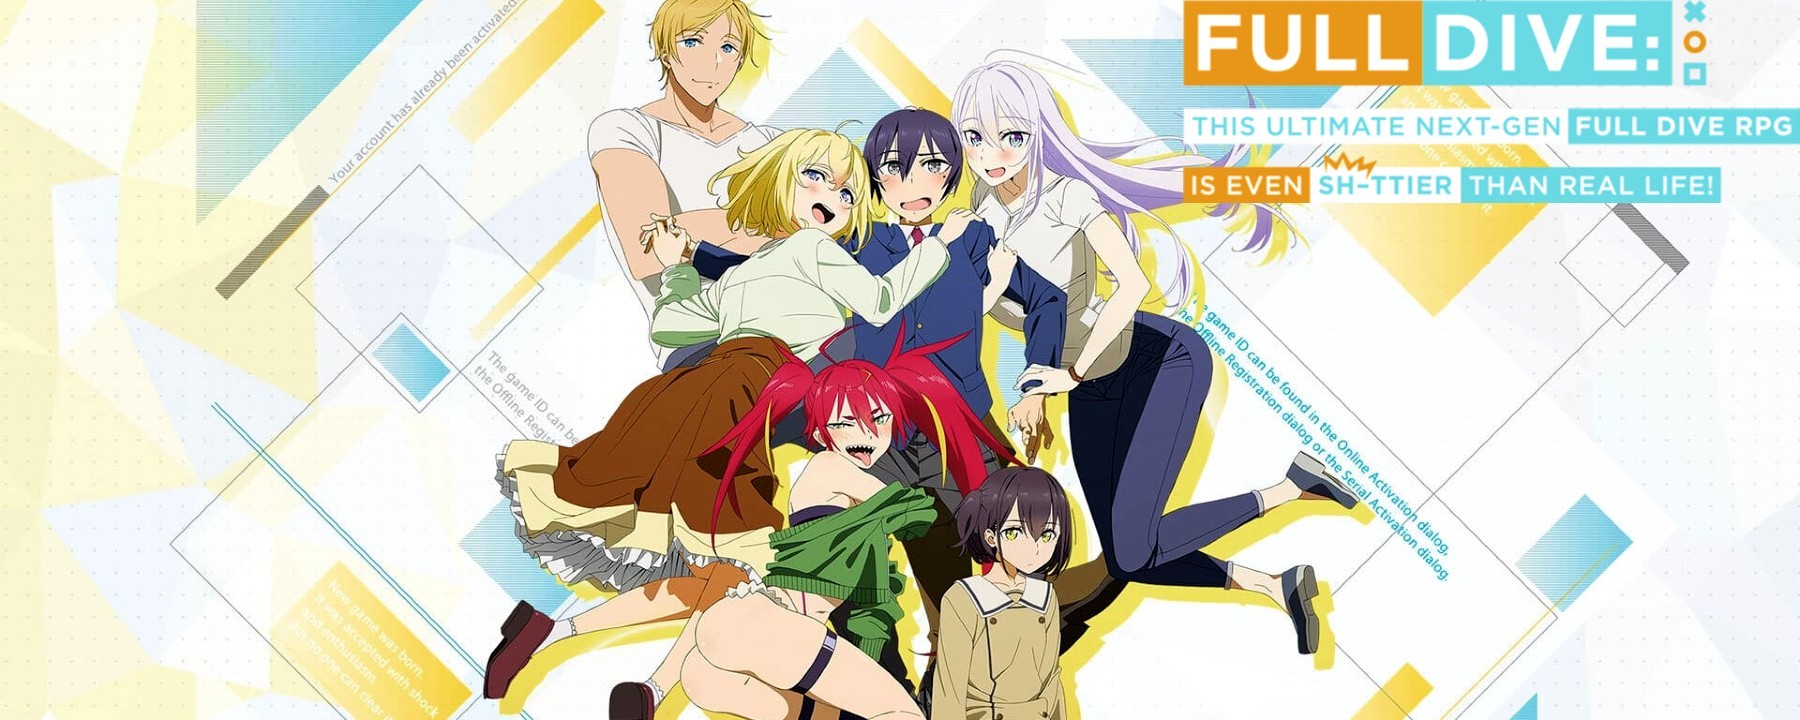 Funimation Showcases 'Full Dive: This Ultimate Next-Gen Full Dive